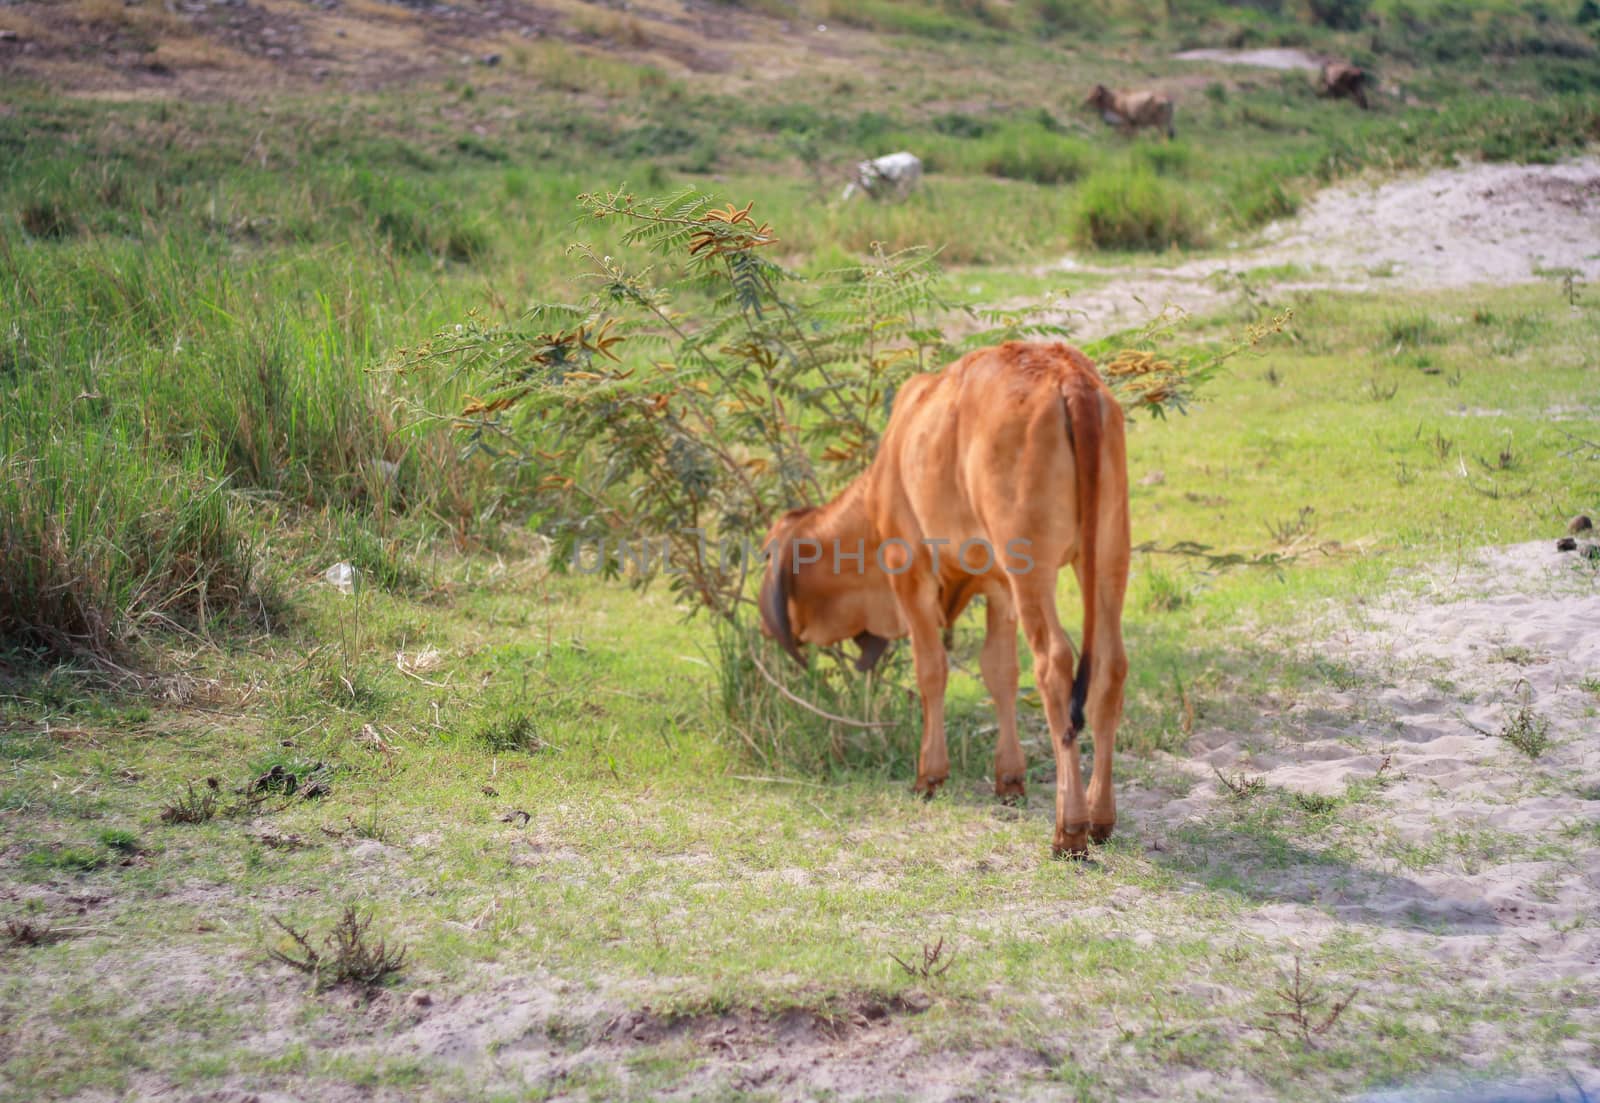 A cow grazing on the ground.